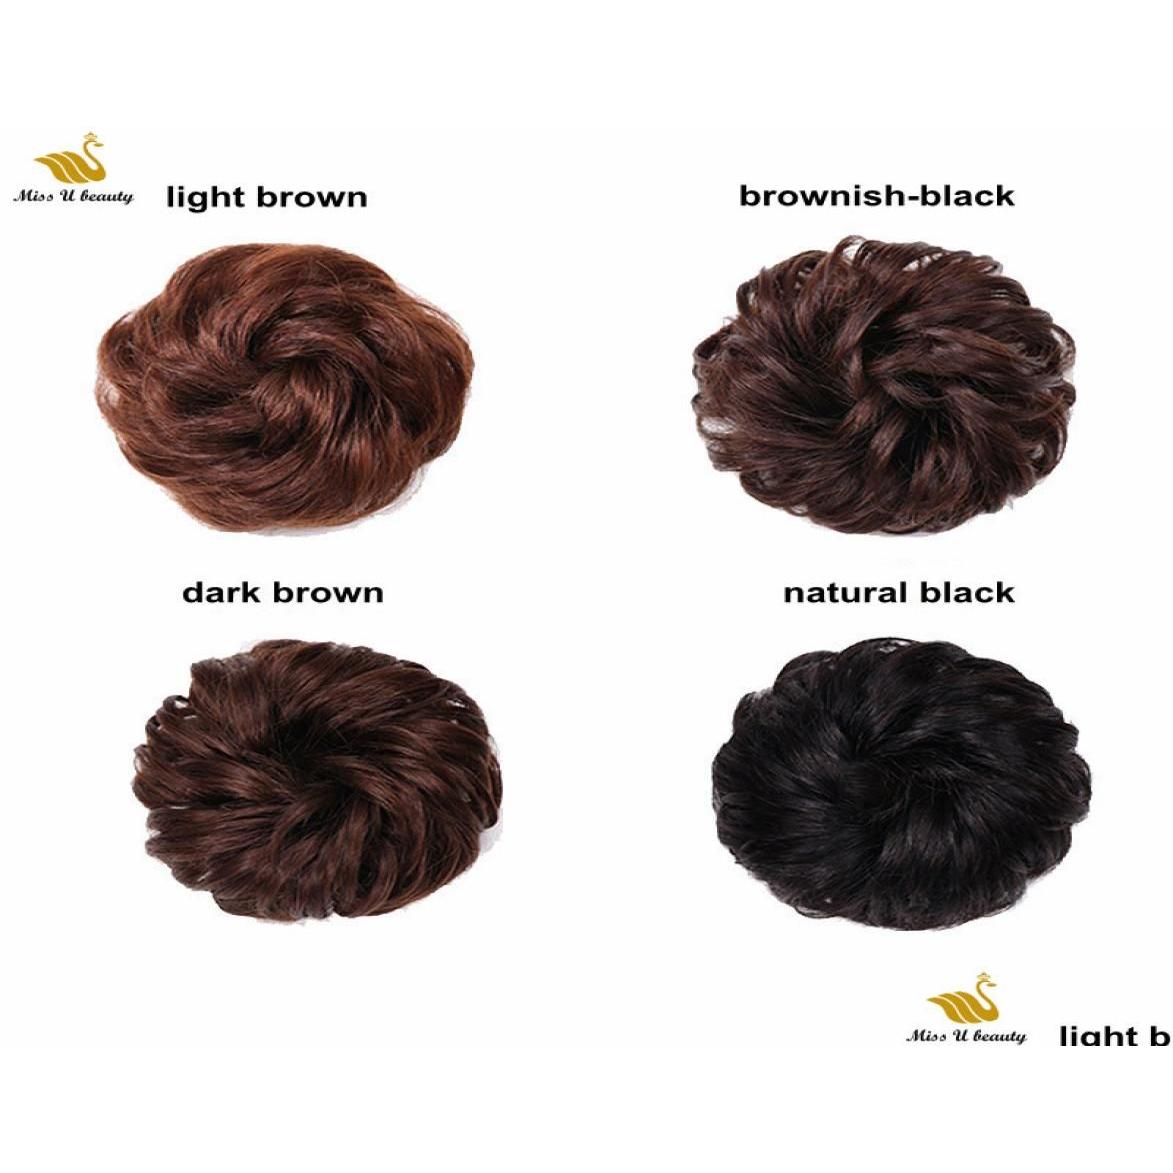 Chignons 100 Real Humanhair Scrunchie Elastic Band Updo Extensions Hair Bun Topknot Black Brown Curly Chignons4786512 Drop Delivery P Dheyc